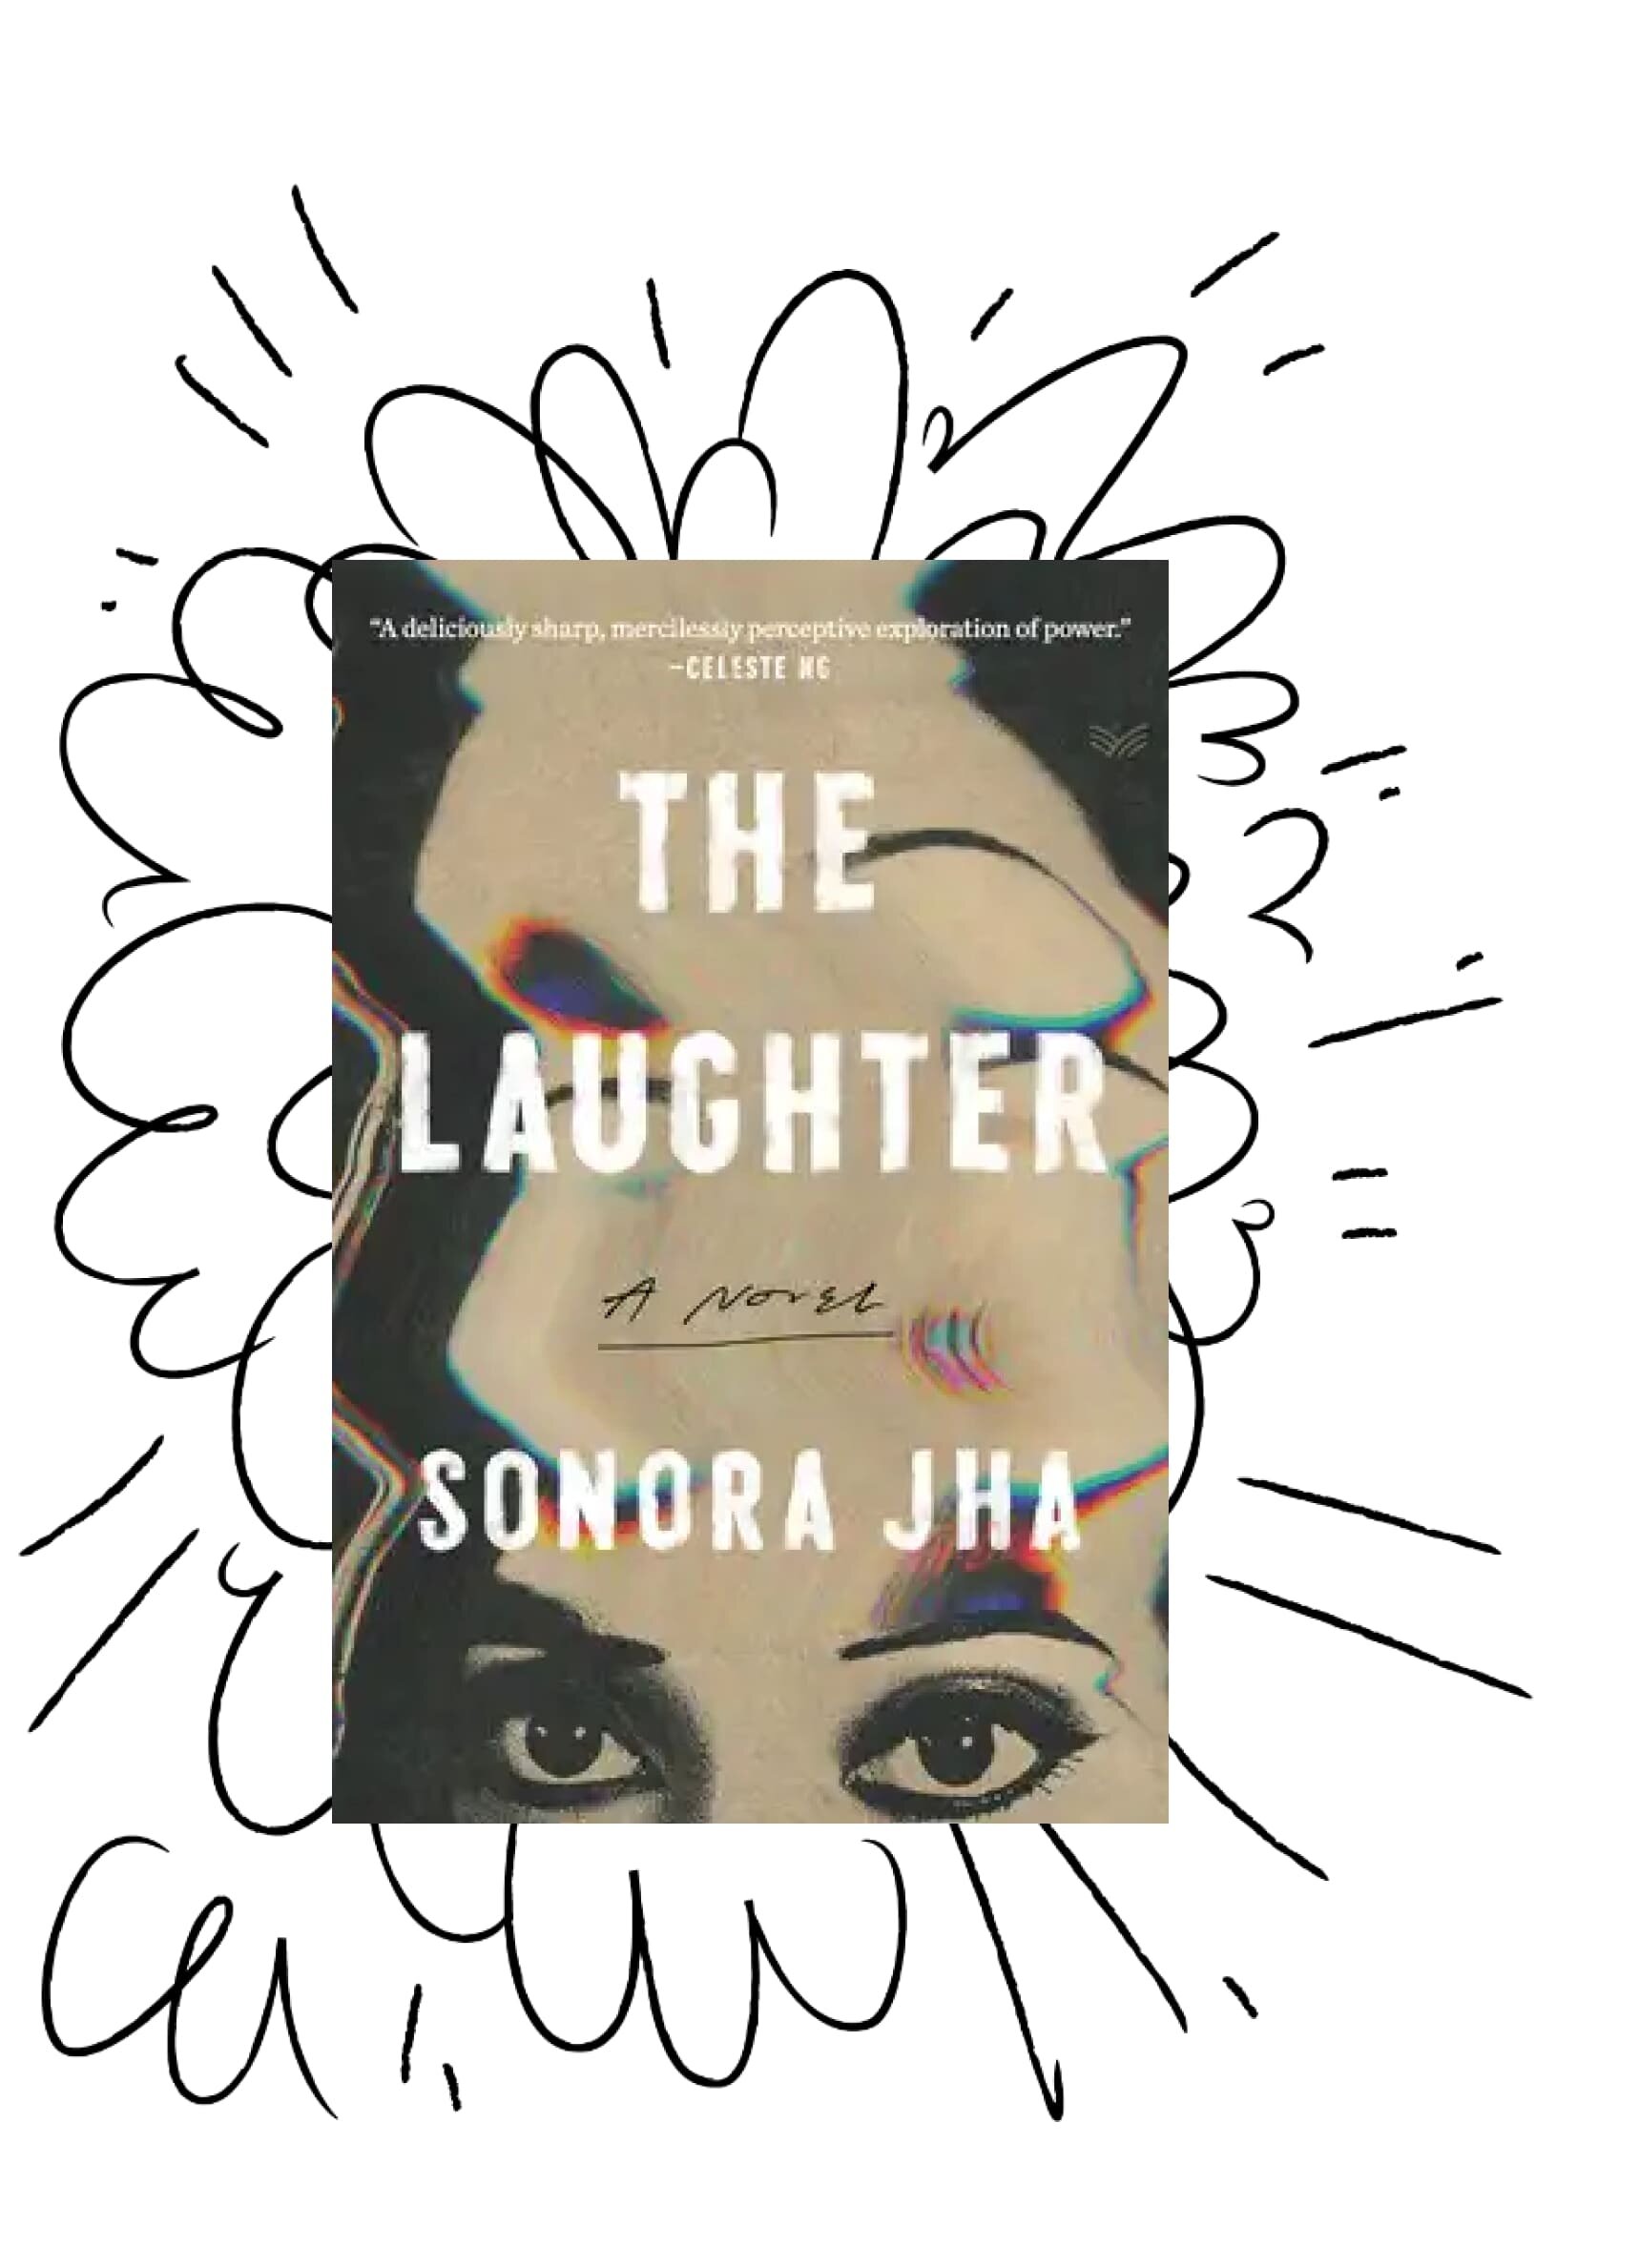 Article image for: The Laughter | An Excerpt of the Novel by Sonora Jha